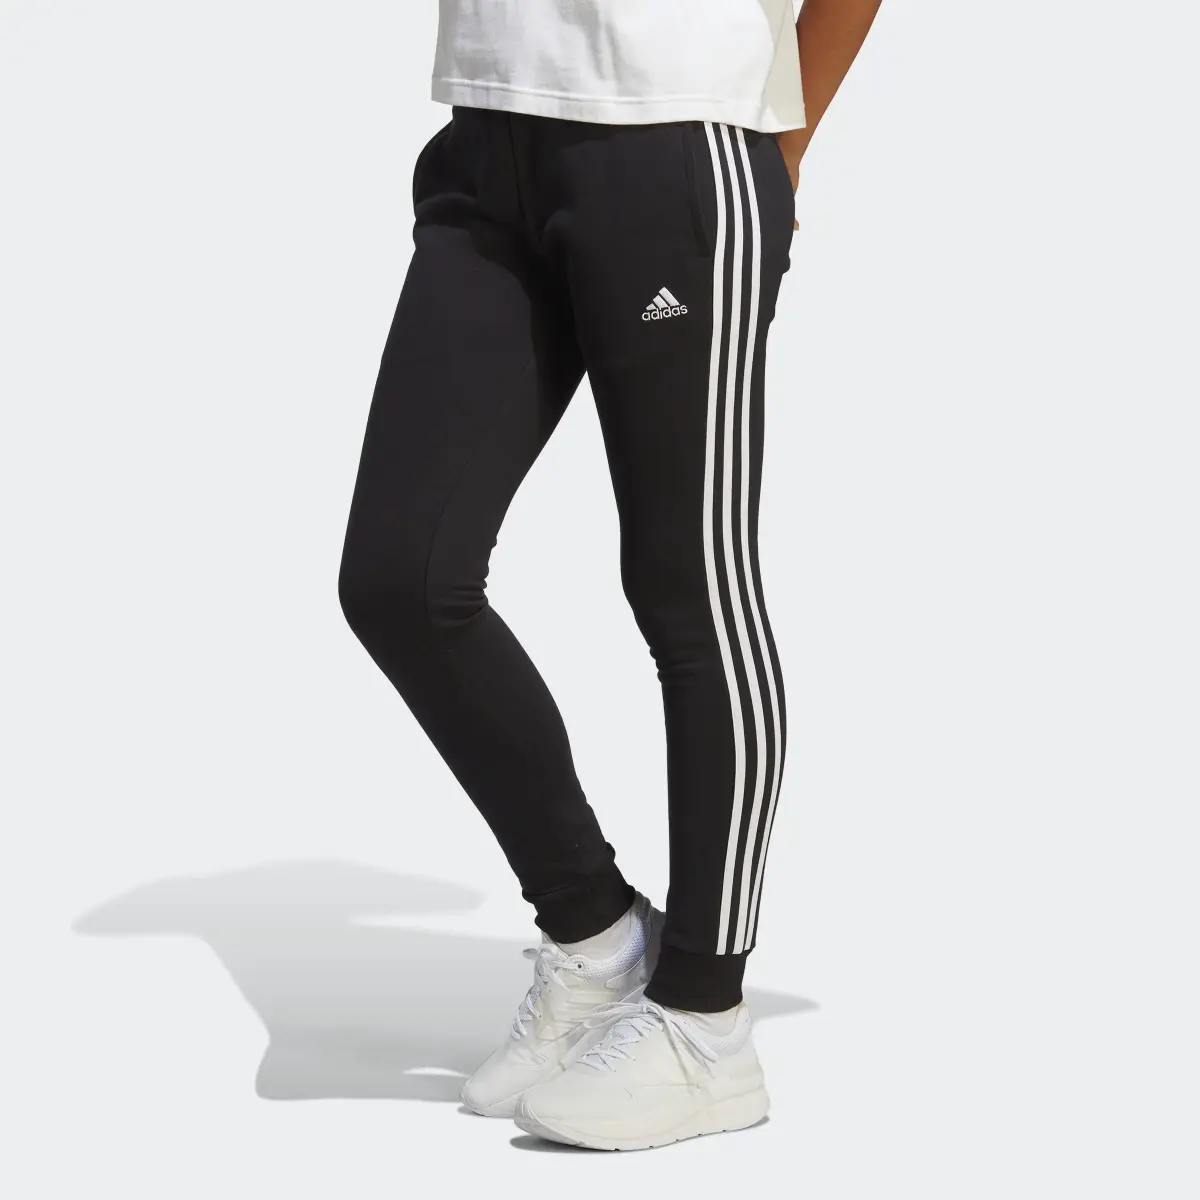 Adidas Essentials 3-Stripes French Terry Cuffed Pants. 1